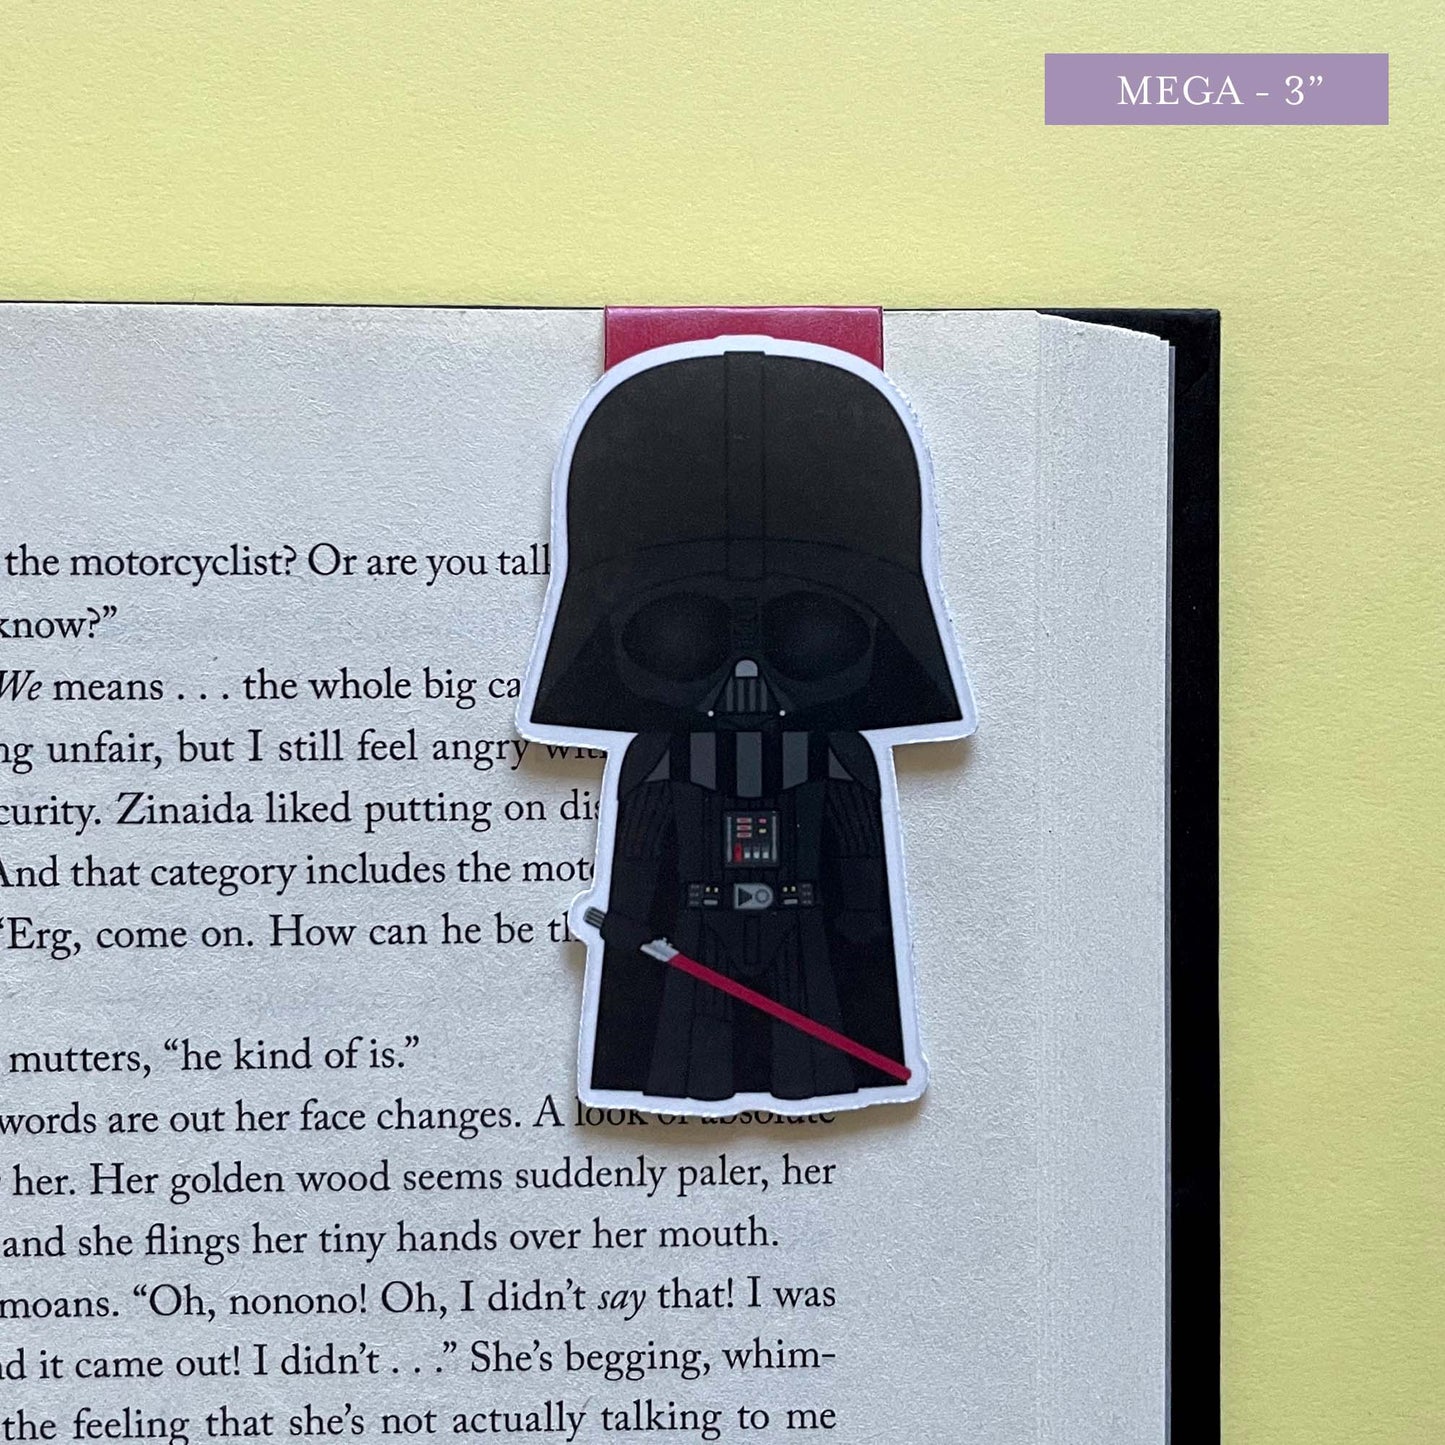 Space Wizards "Darth Vader" Magnetic Bookmark